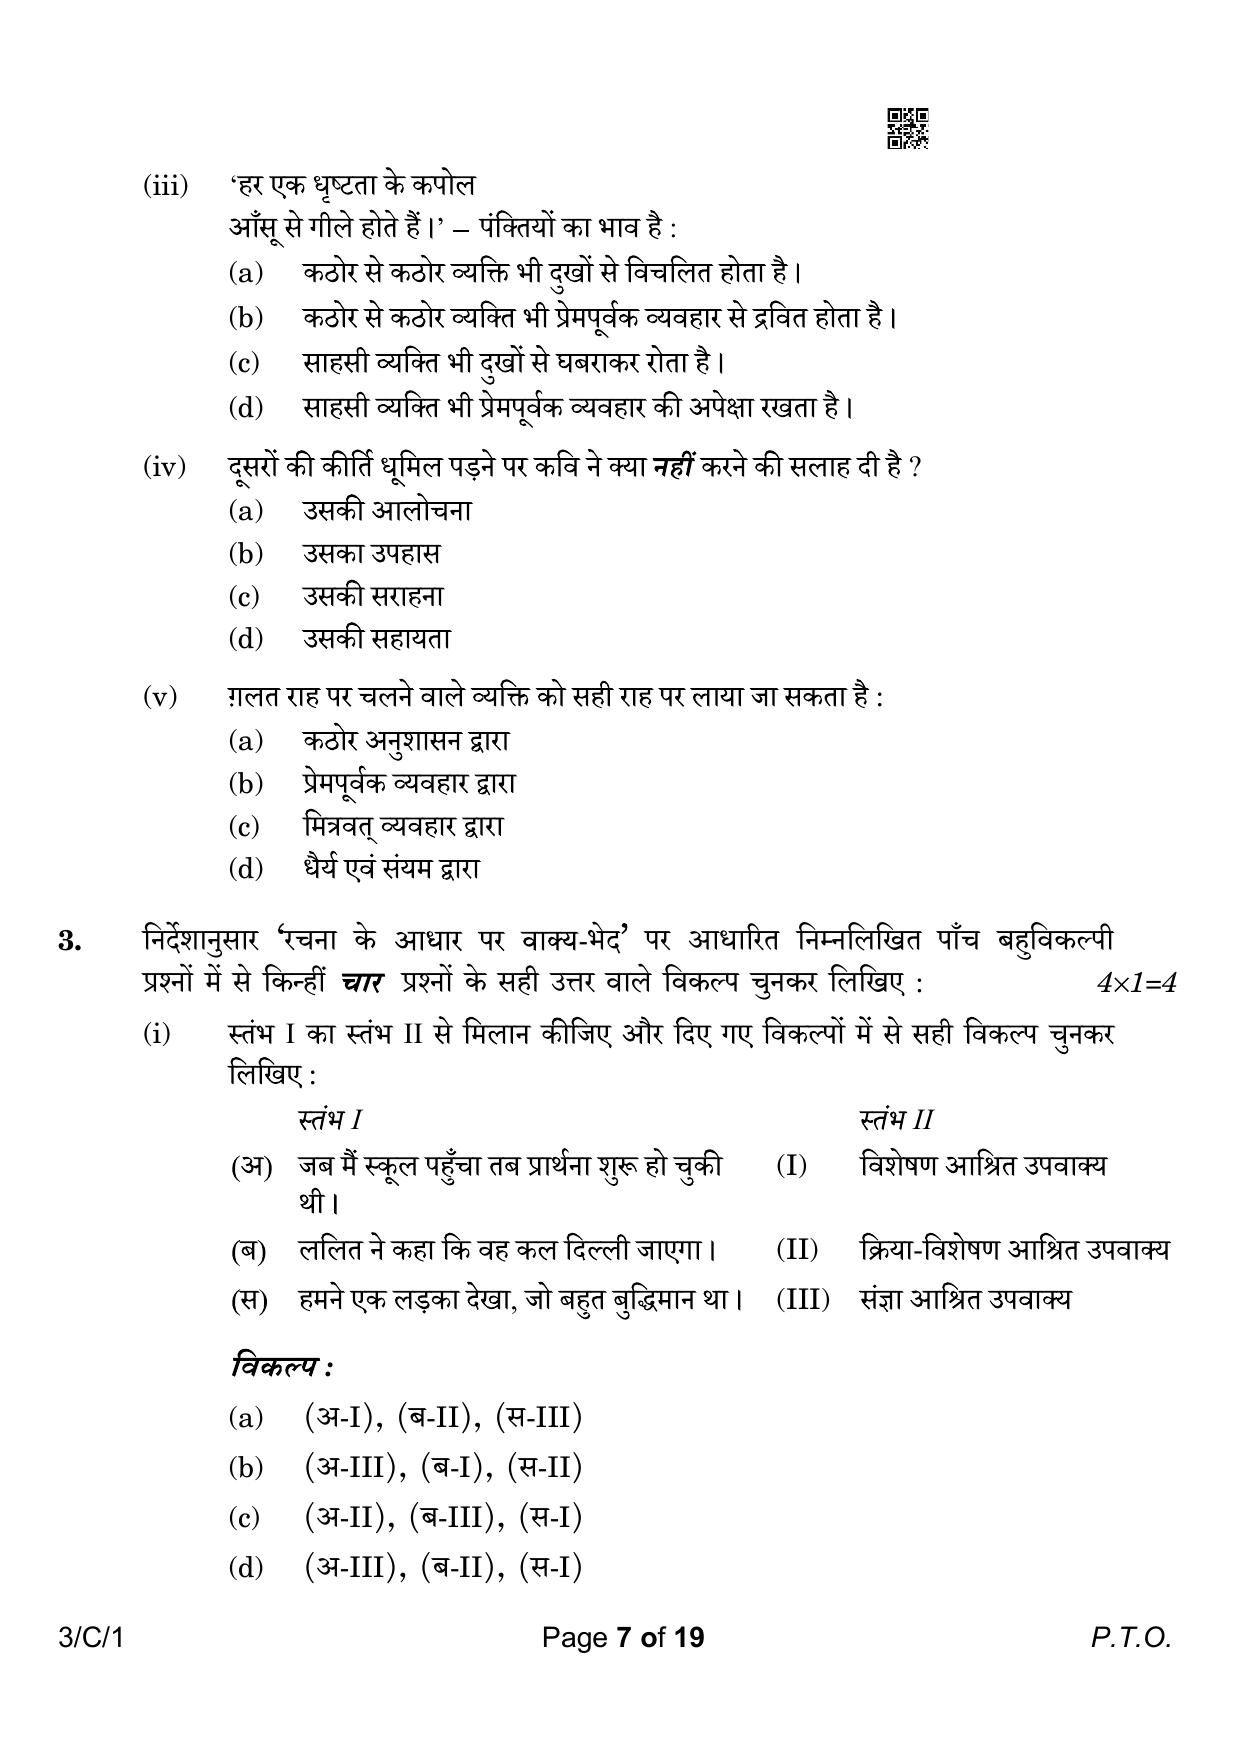 CBSE Class 10 3-1 Hindi A 2023 (Compartment) Question Paper - Page 7